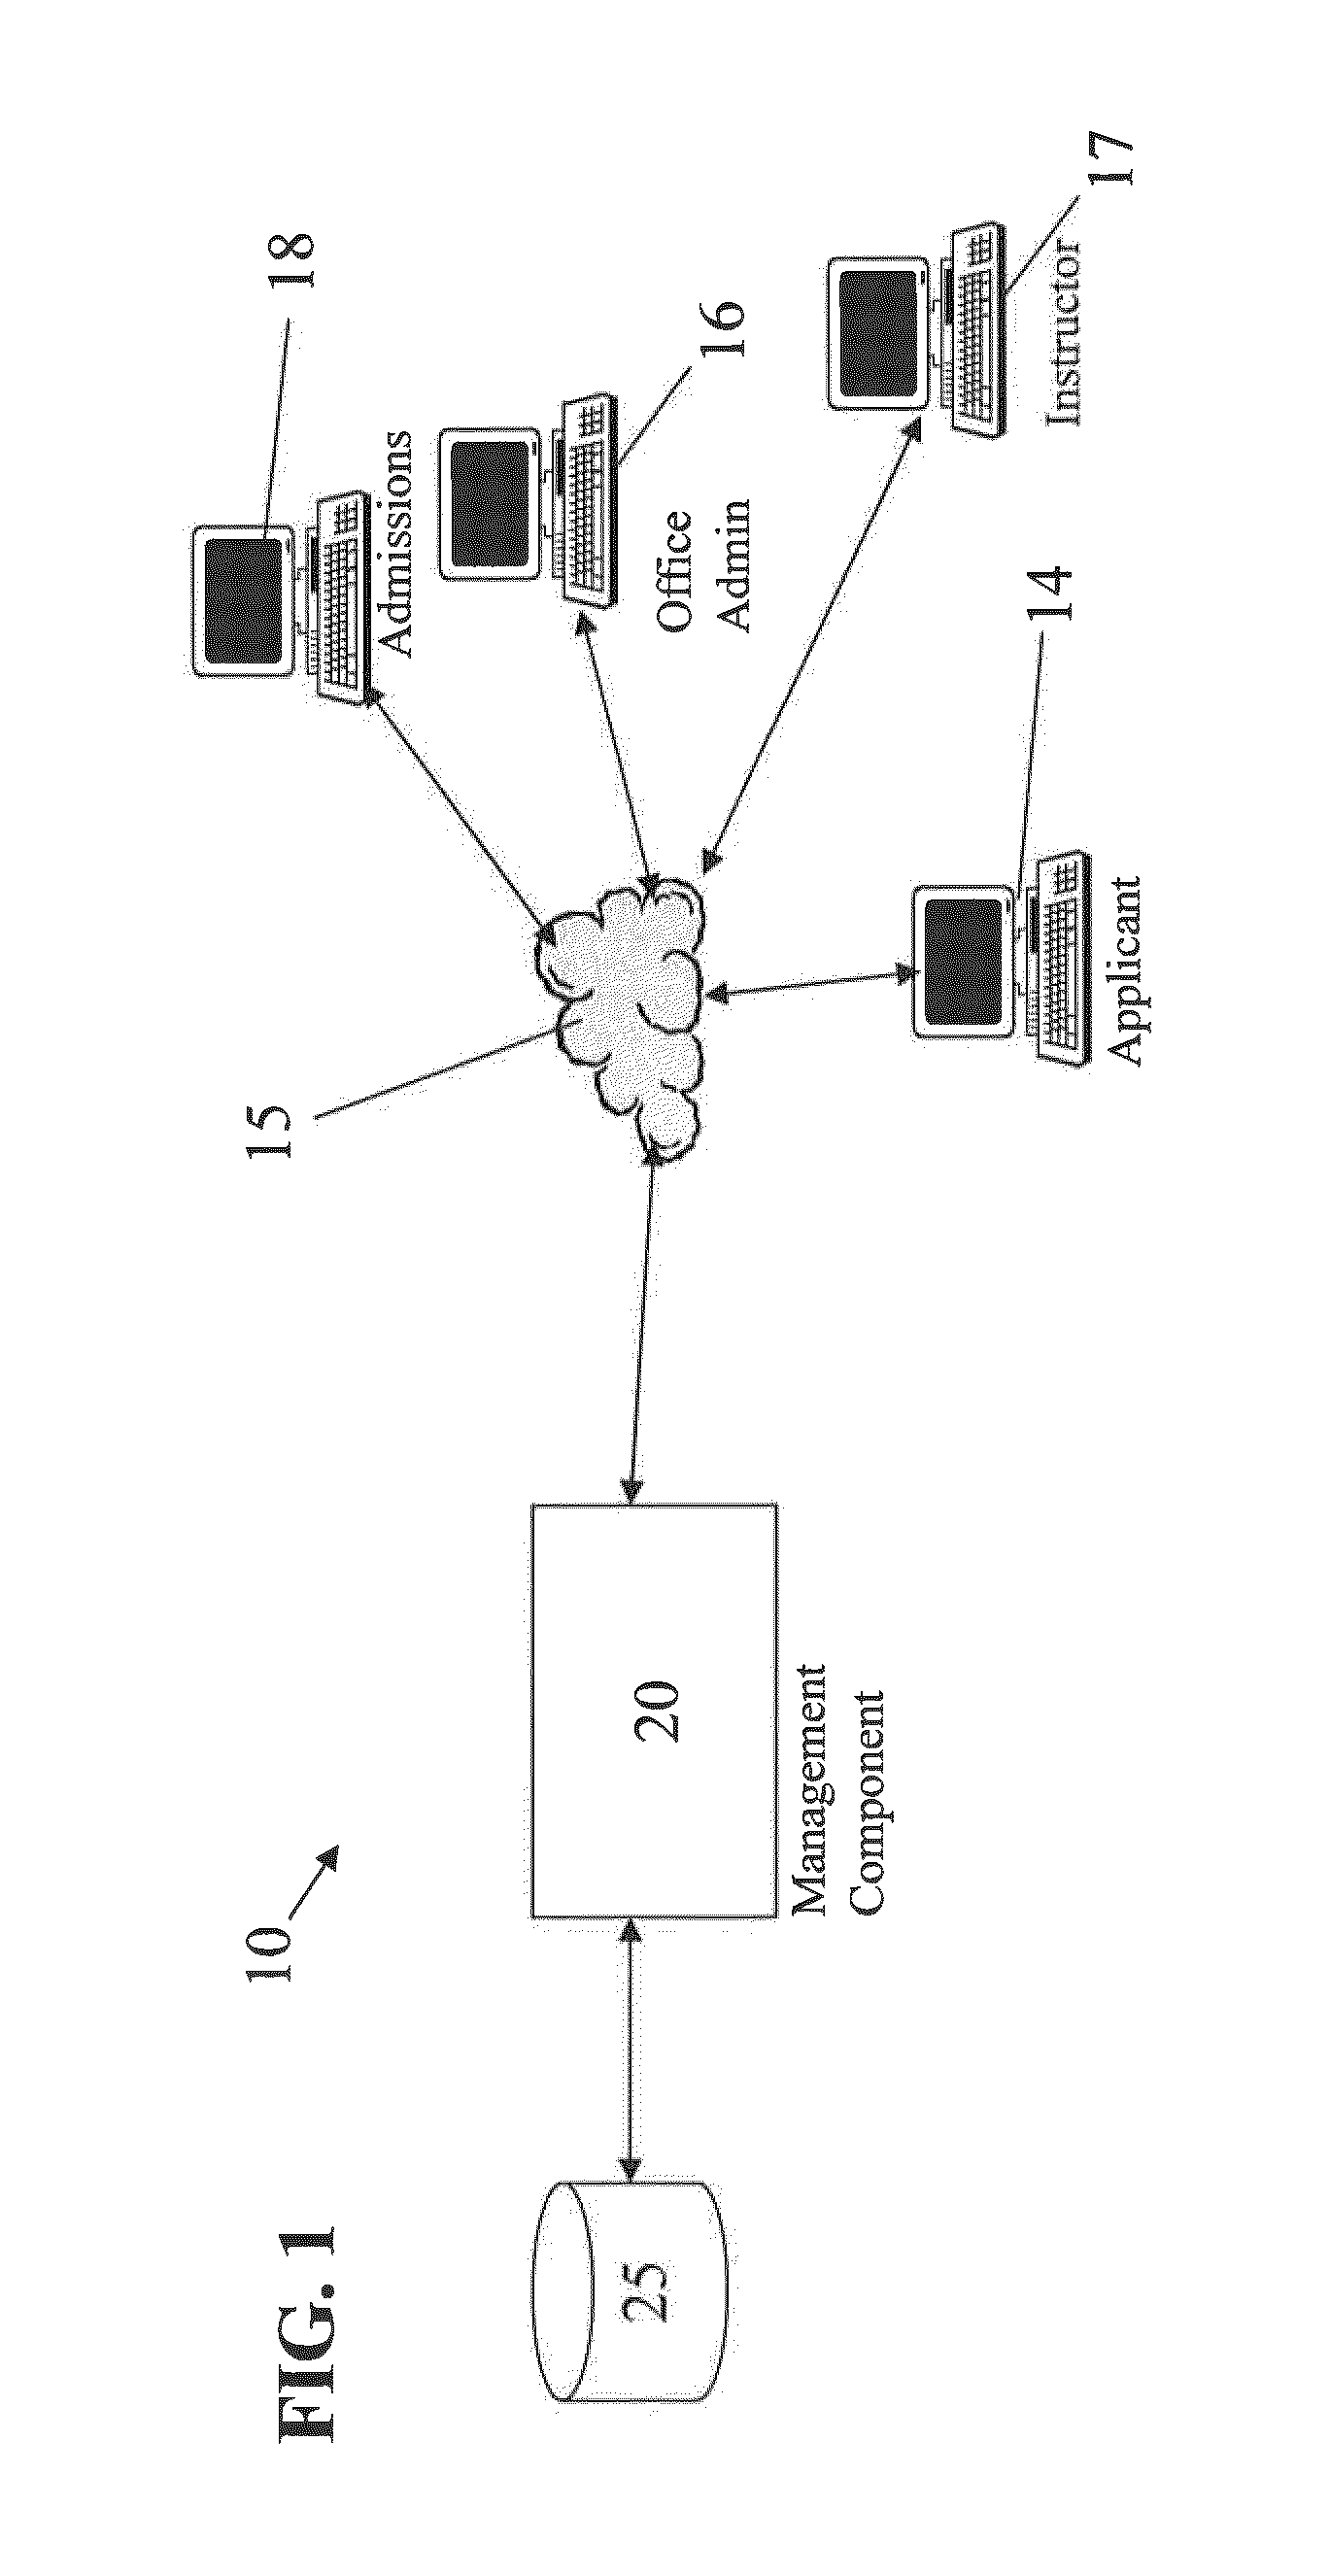 System and Method for Automated Admissions Process and Yield Rate Management